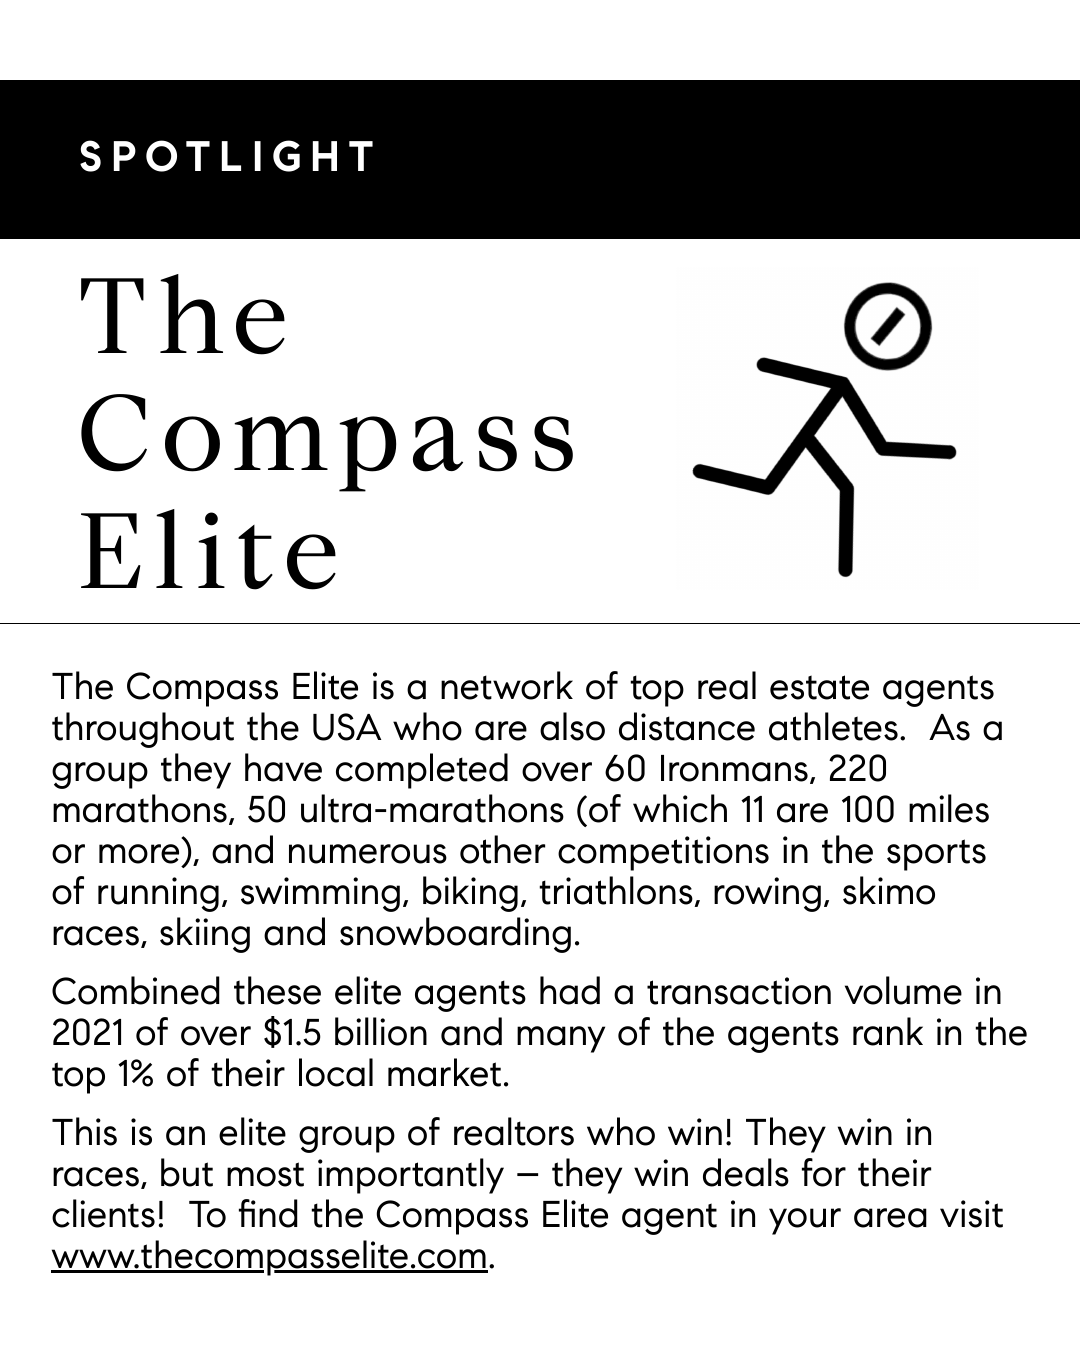 A text banner advertising The Compass Elite real estate agents